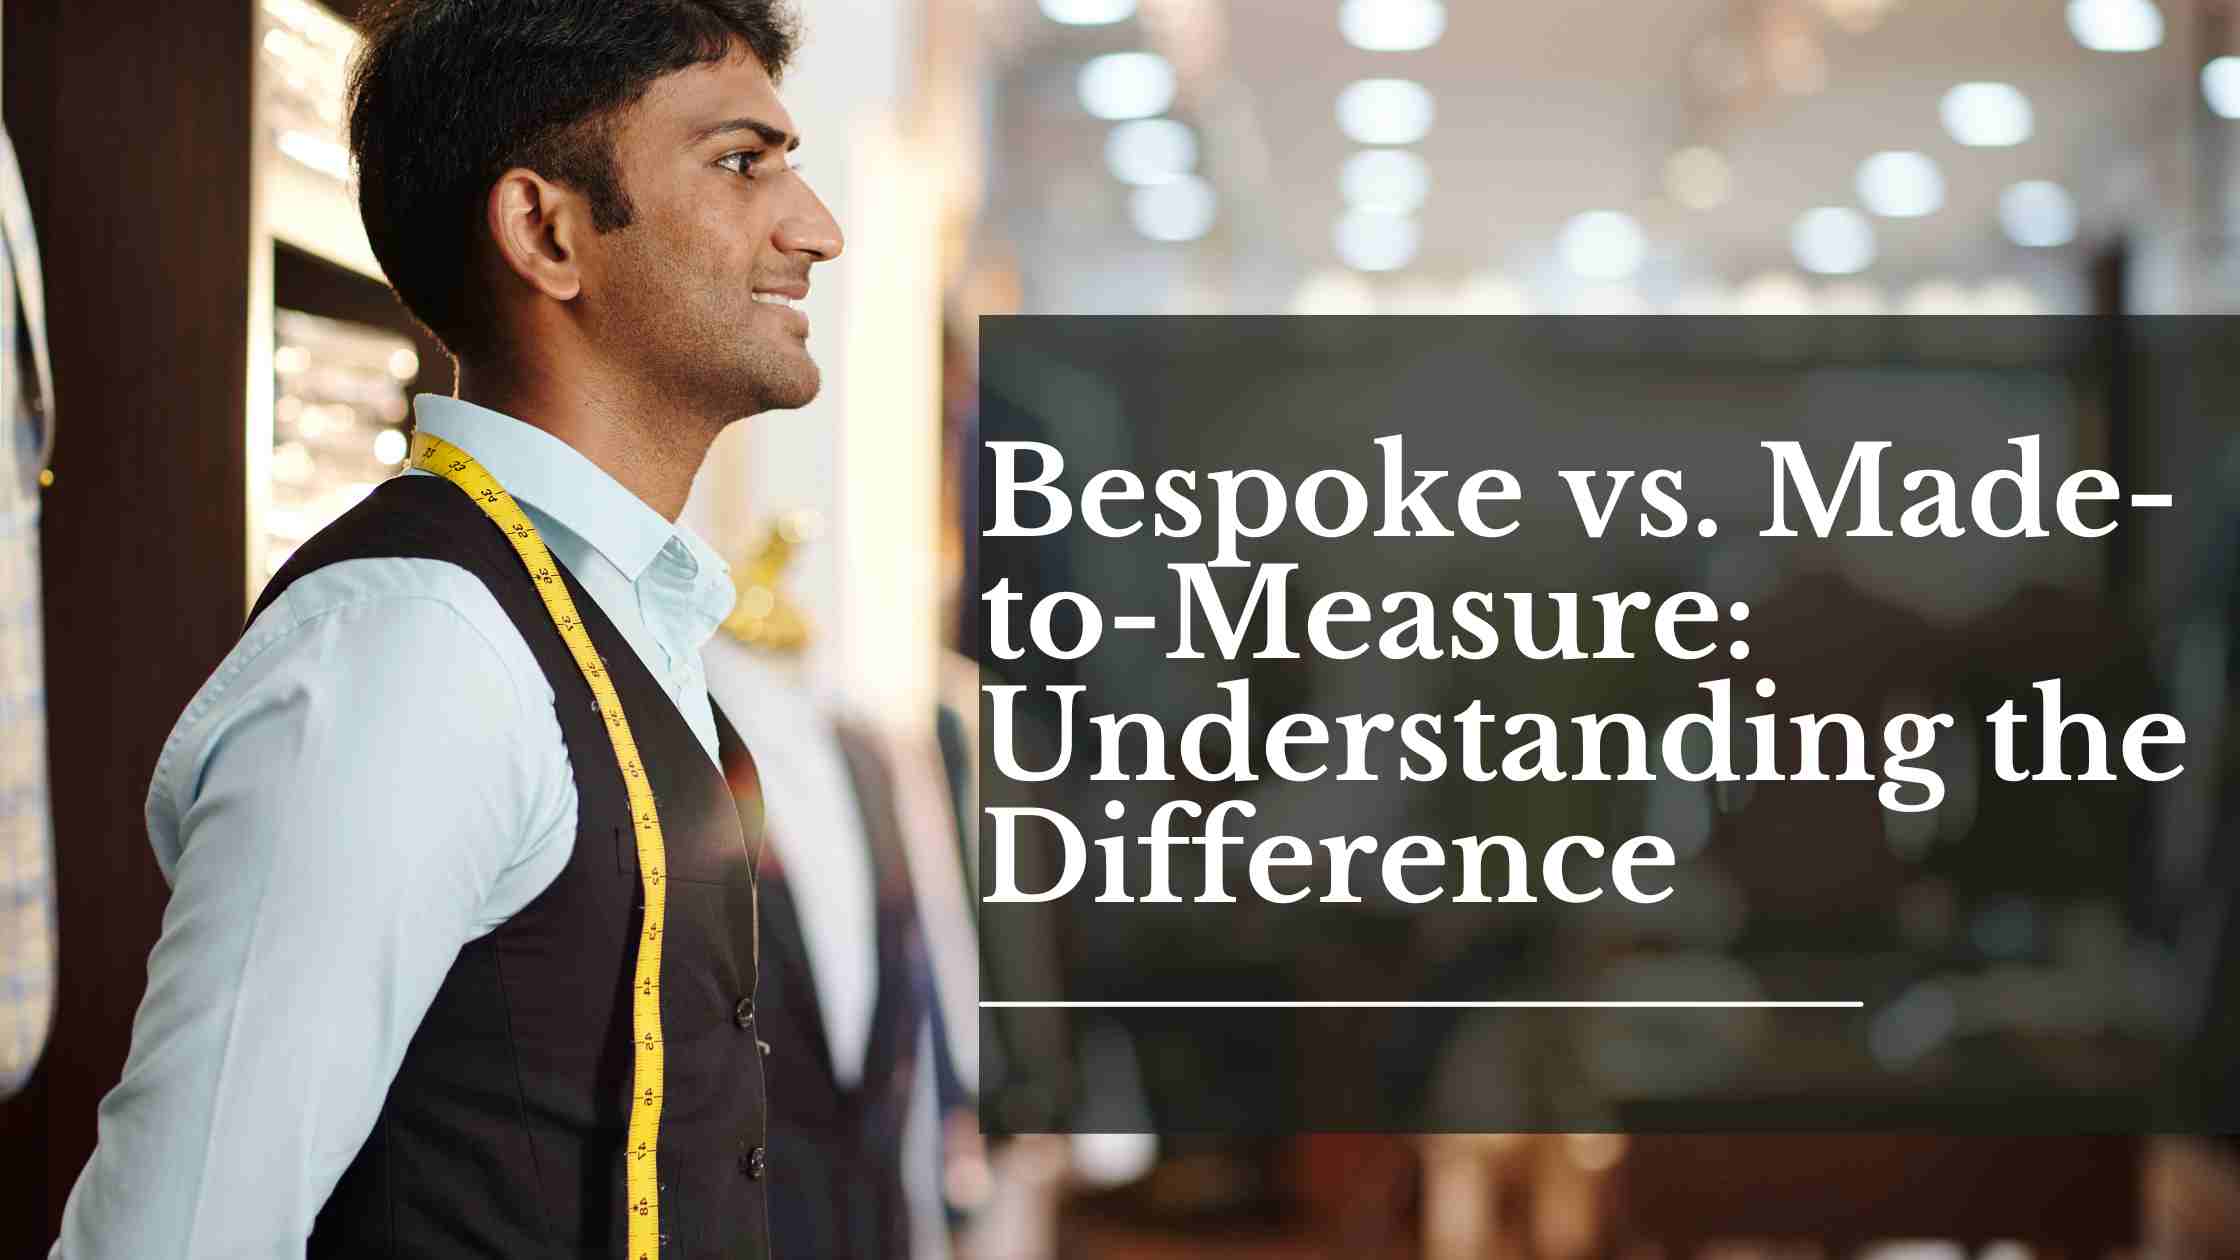 Bespoke vs. Made-to-Measure: Understanding the Difference